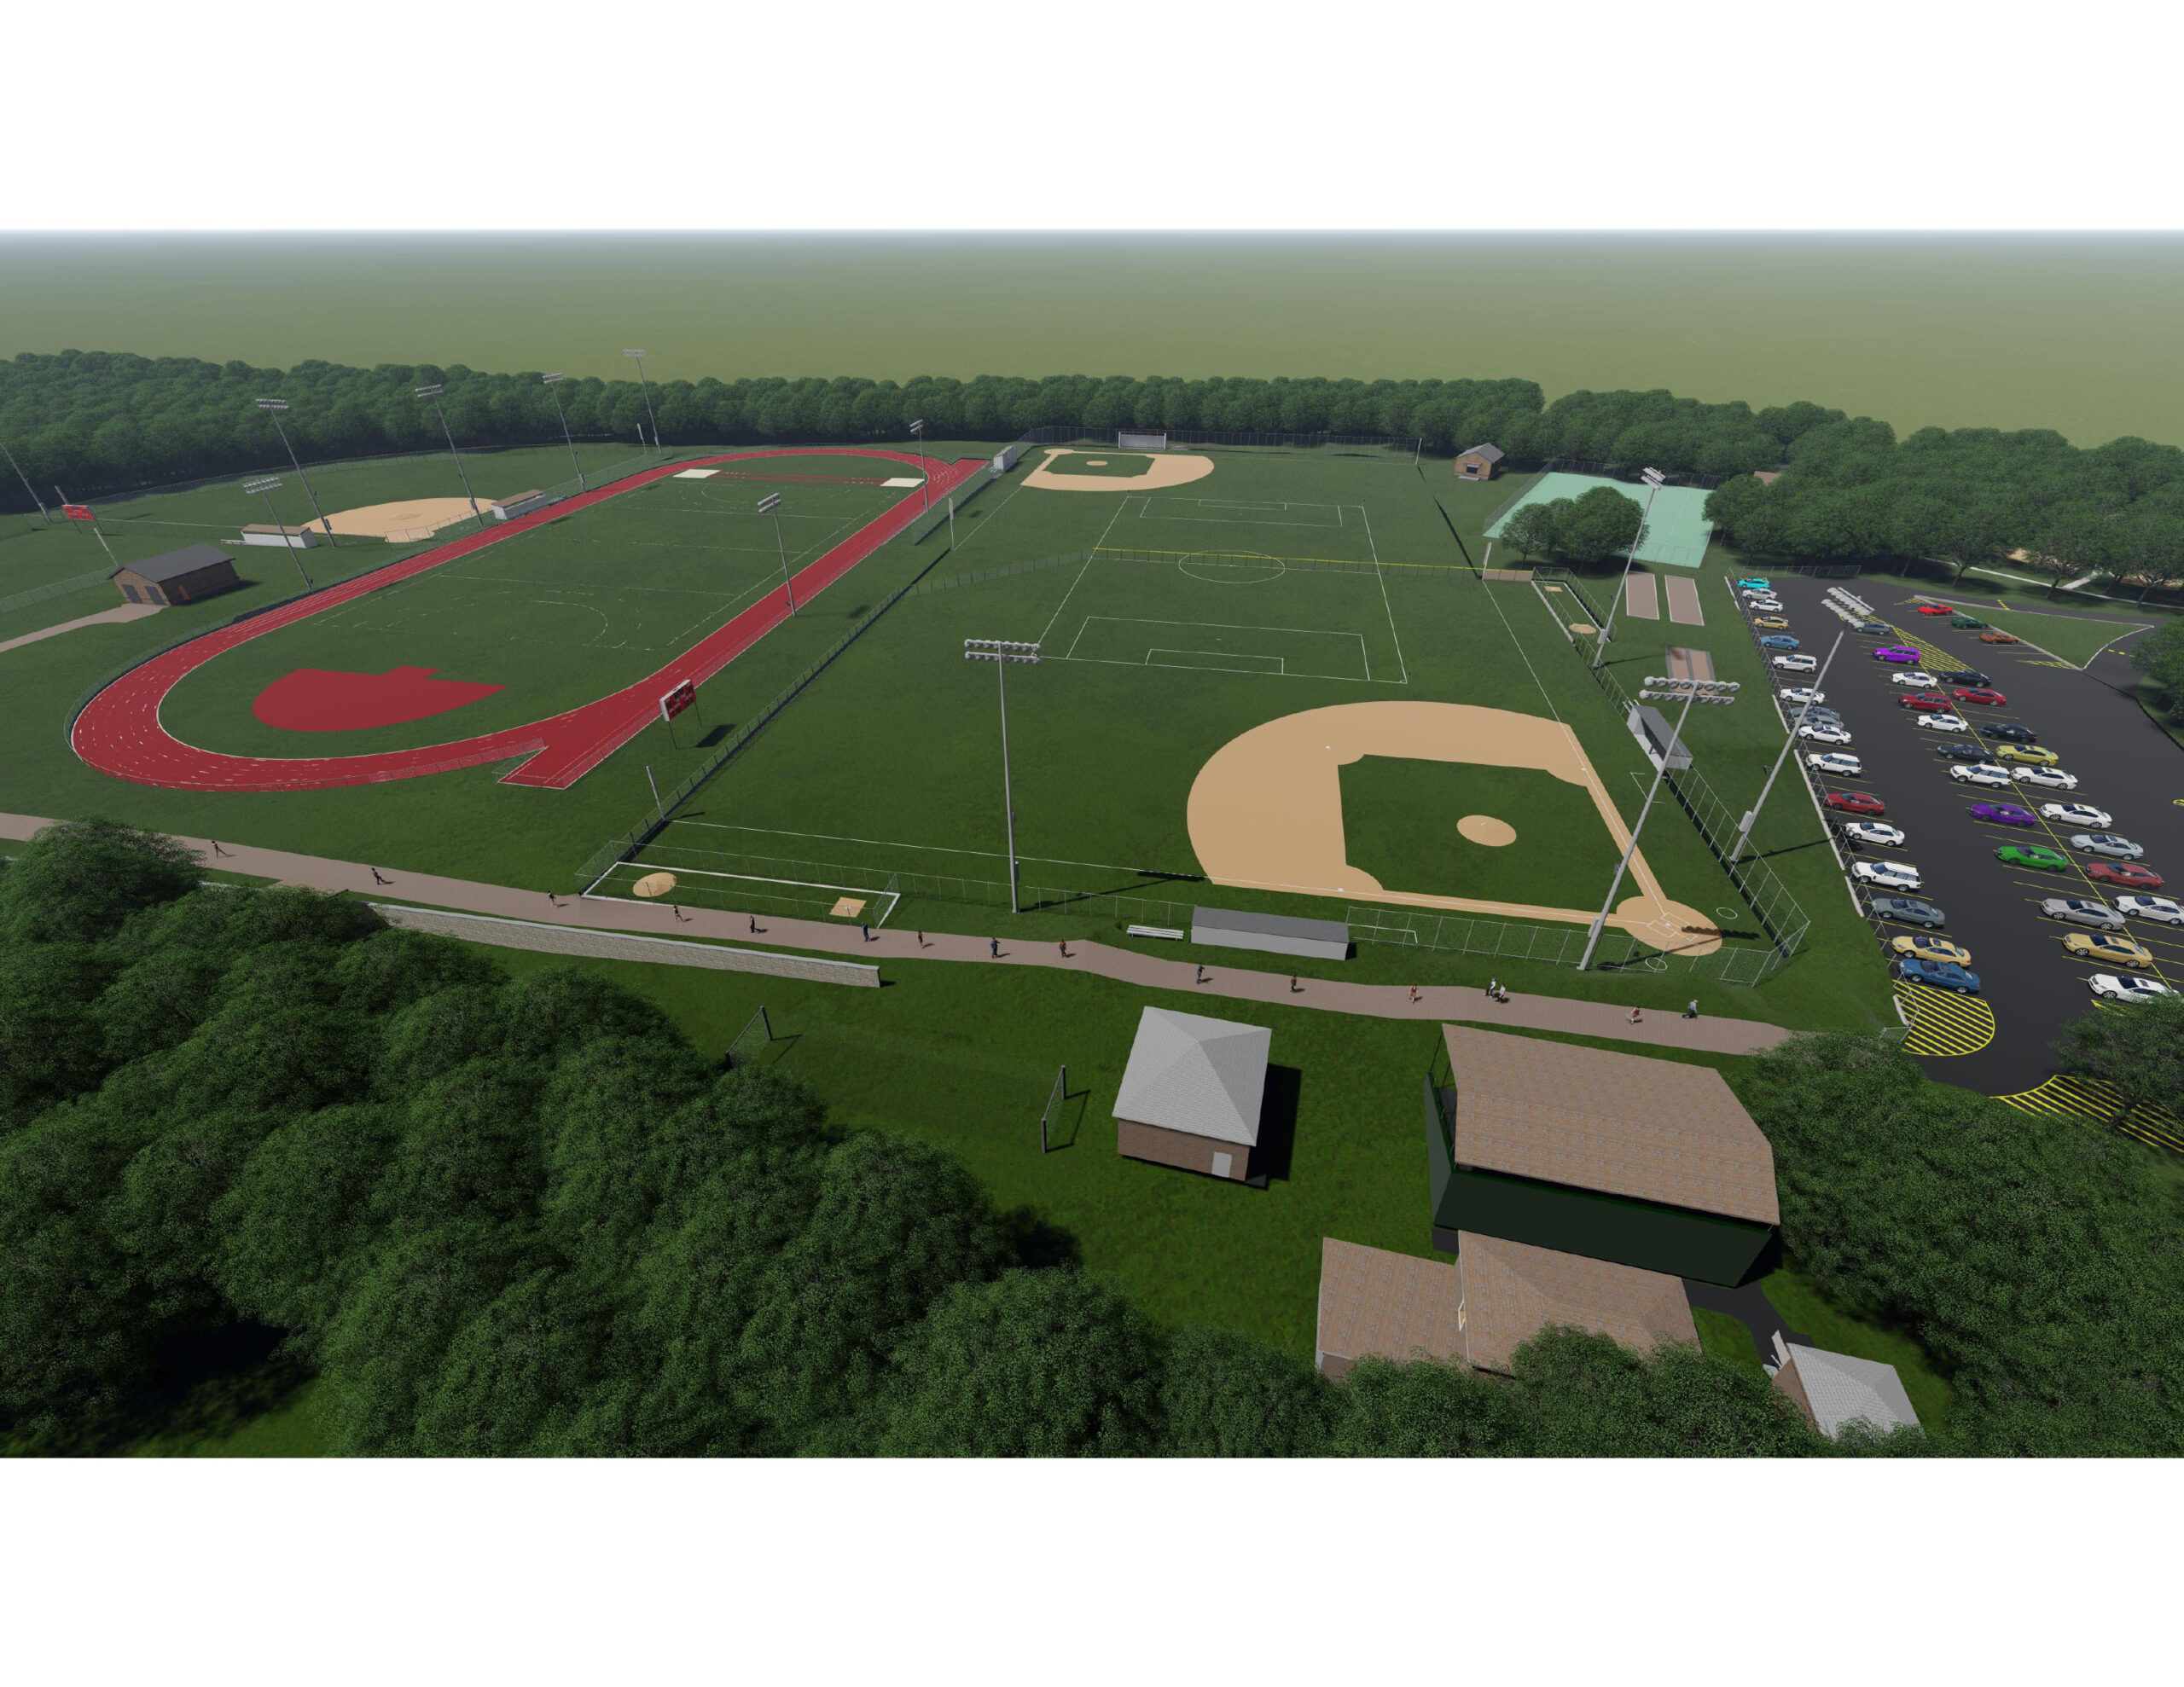 Detailed plans for a capital improvement project at Mashashimuet Park were presented at Monday's Sag Harbor School Board of Education meeting.